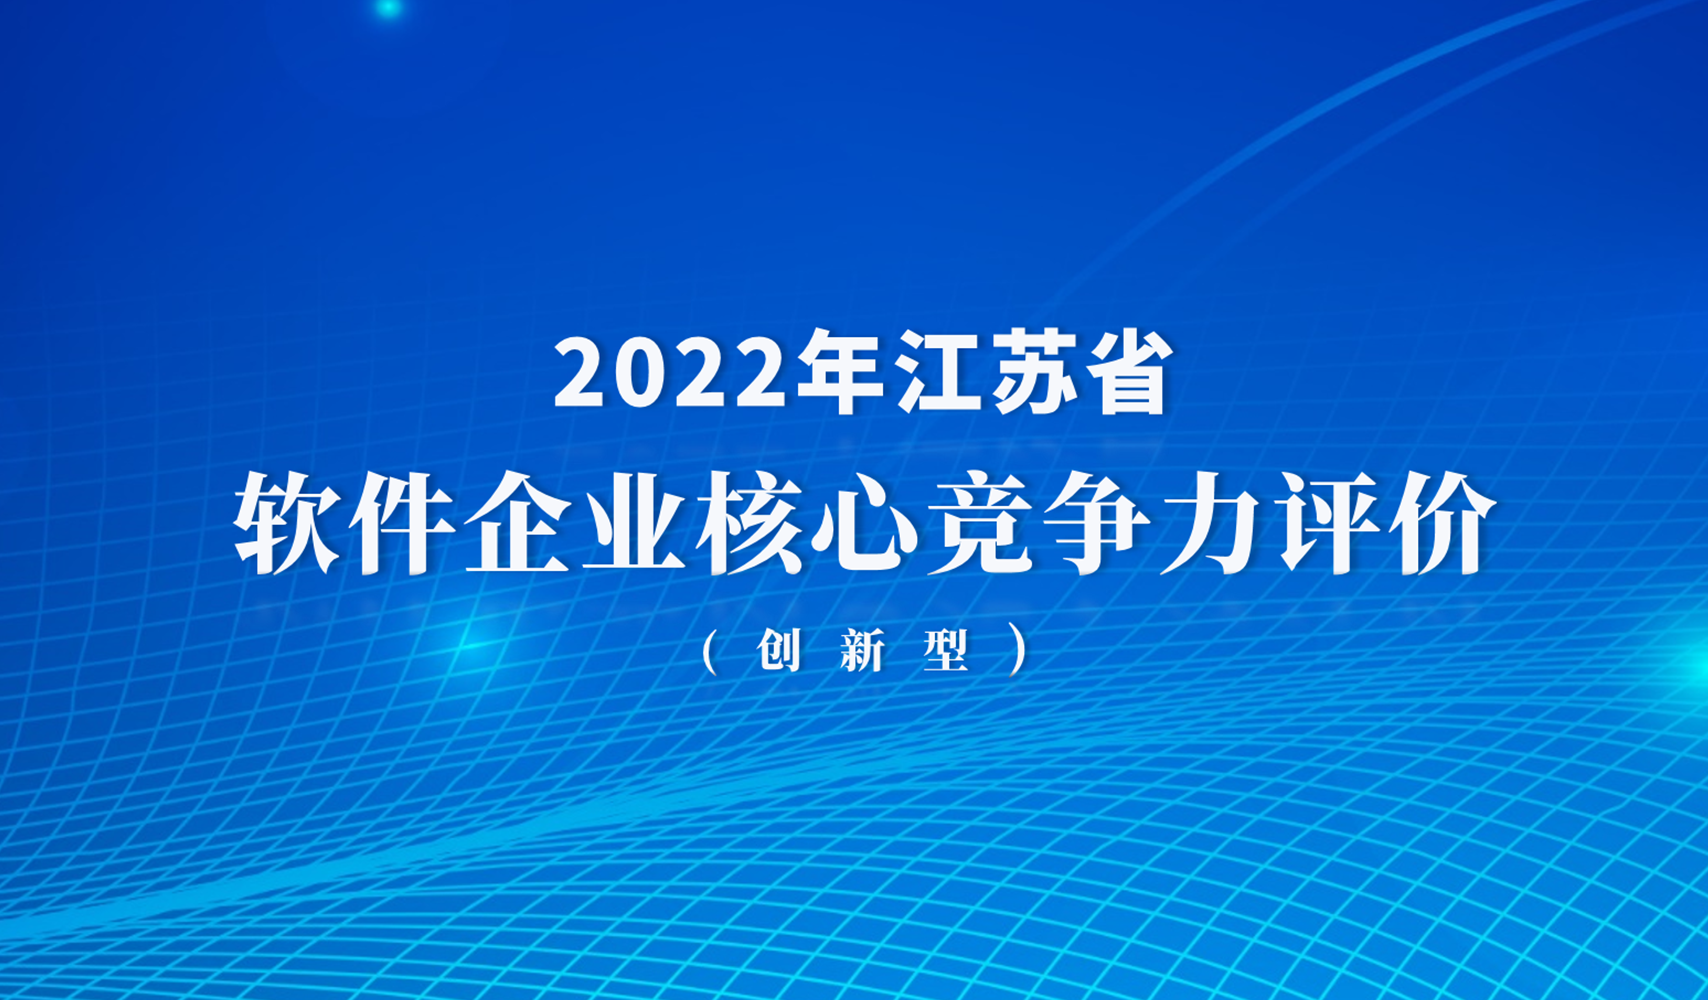 Demonstrating innovation strength! Minivision Technology Passed the 2022 Jiangsu Software Enterprise Core Competitiveness Evaluation